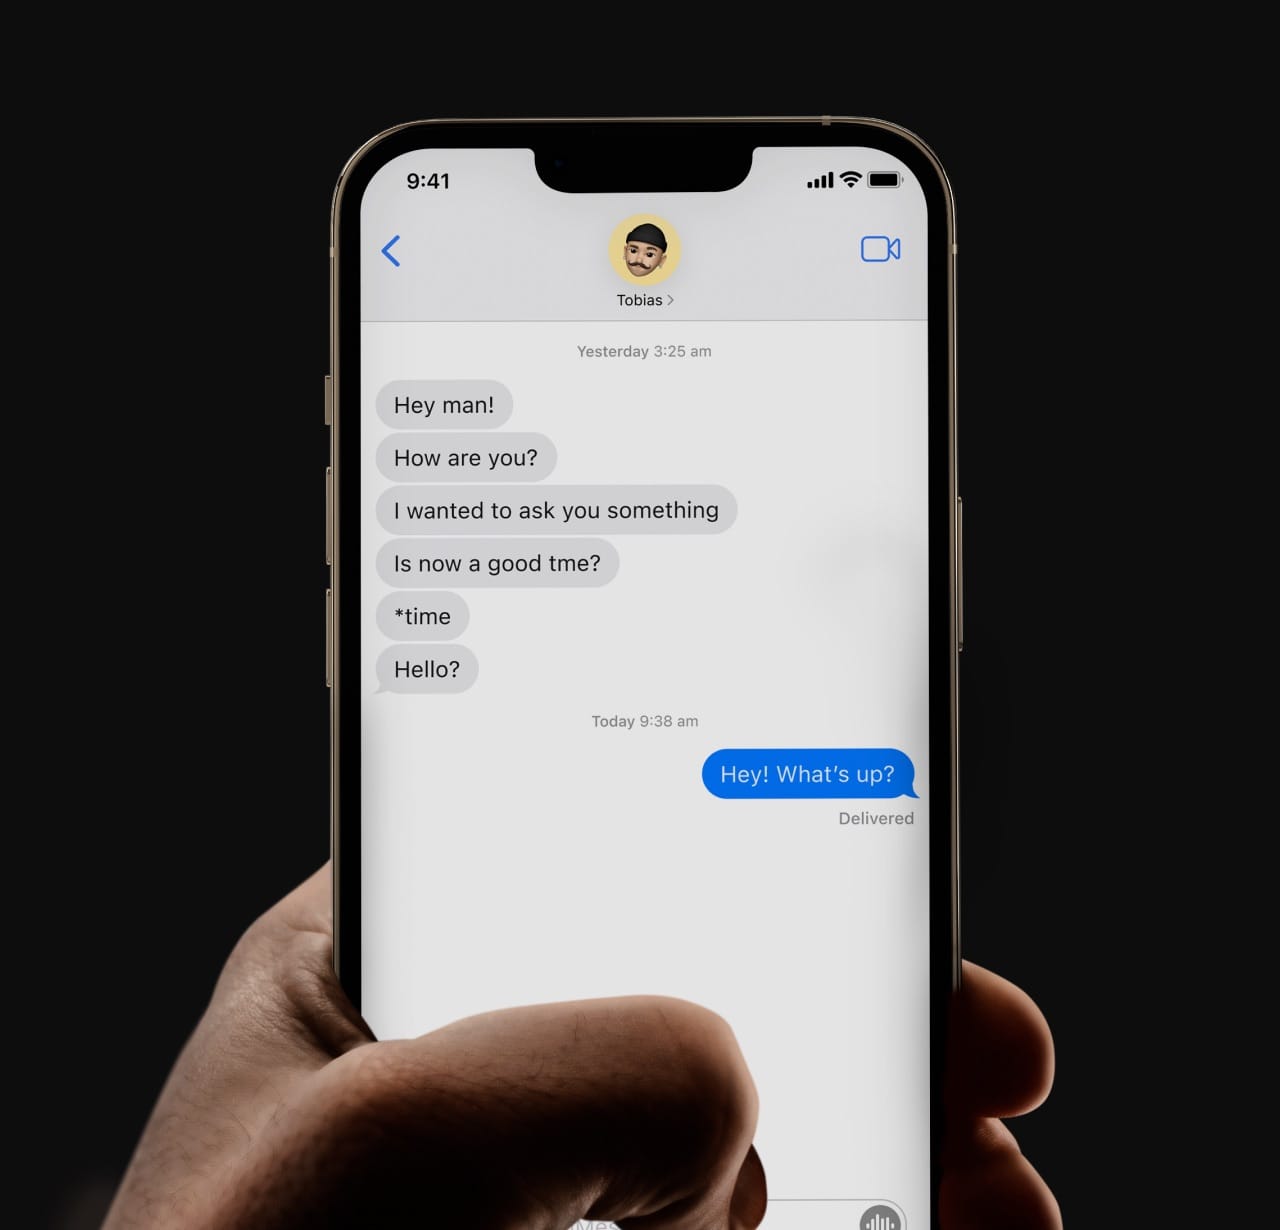 Close-up shot of an iPhone showing an iMessage chat